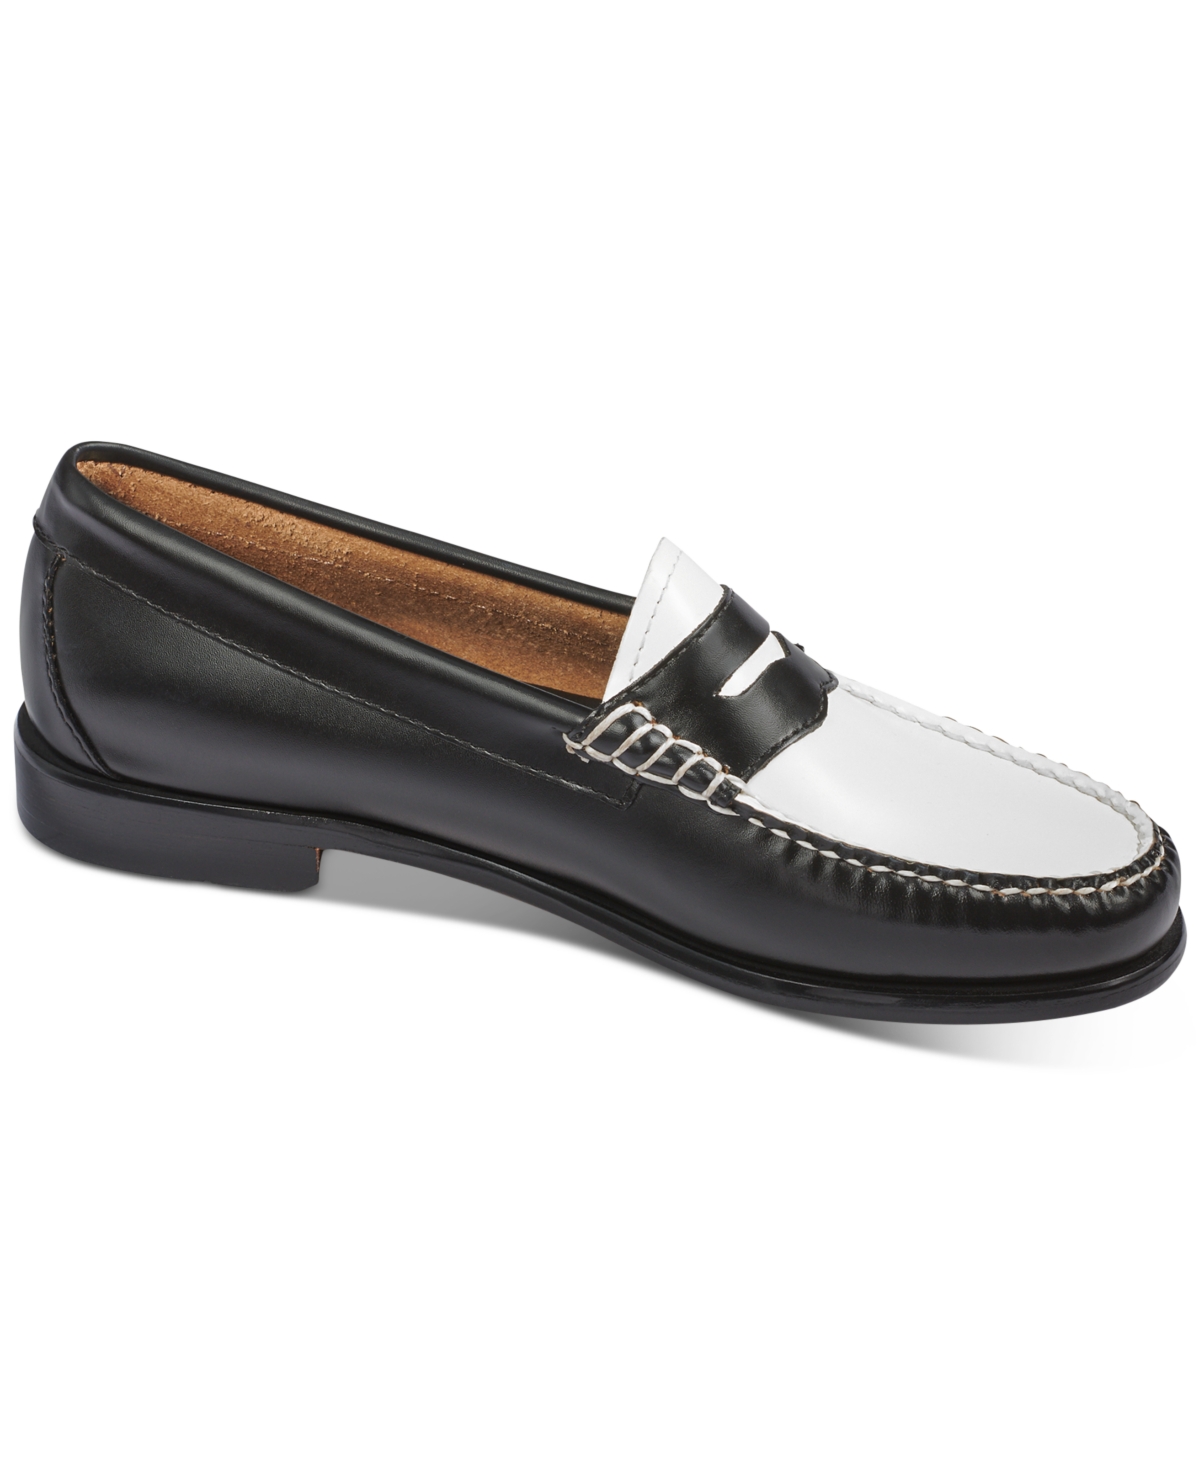 Gh Bass Women's Whitney Weejun Loafers Women's Shoes